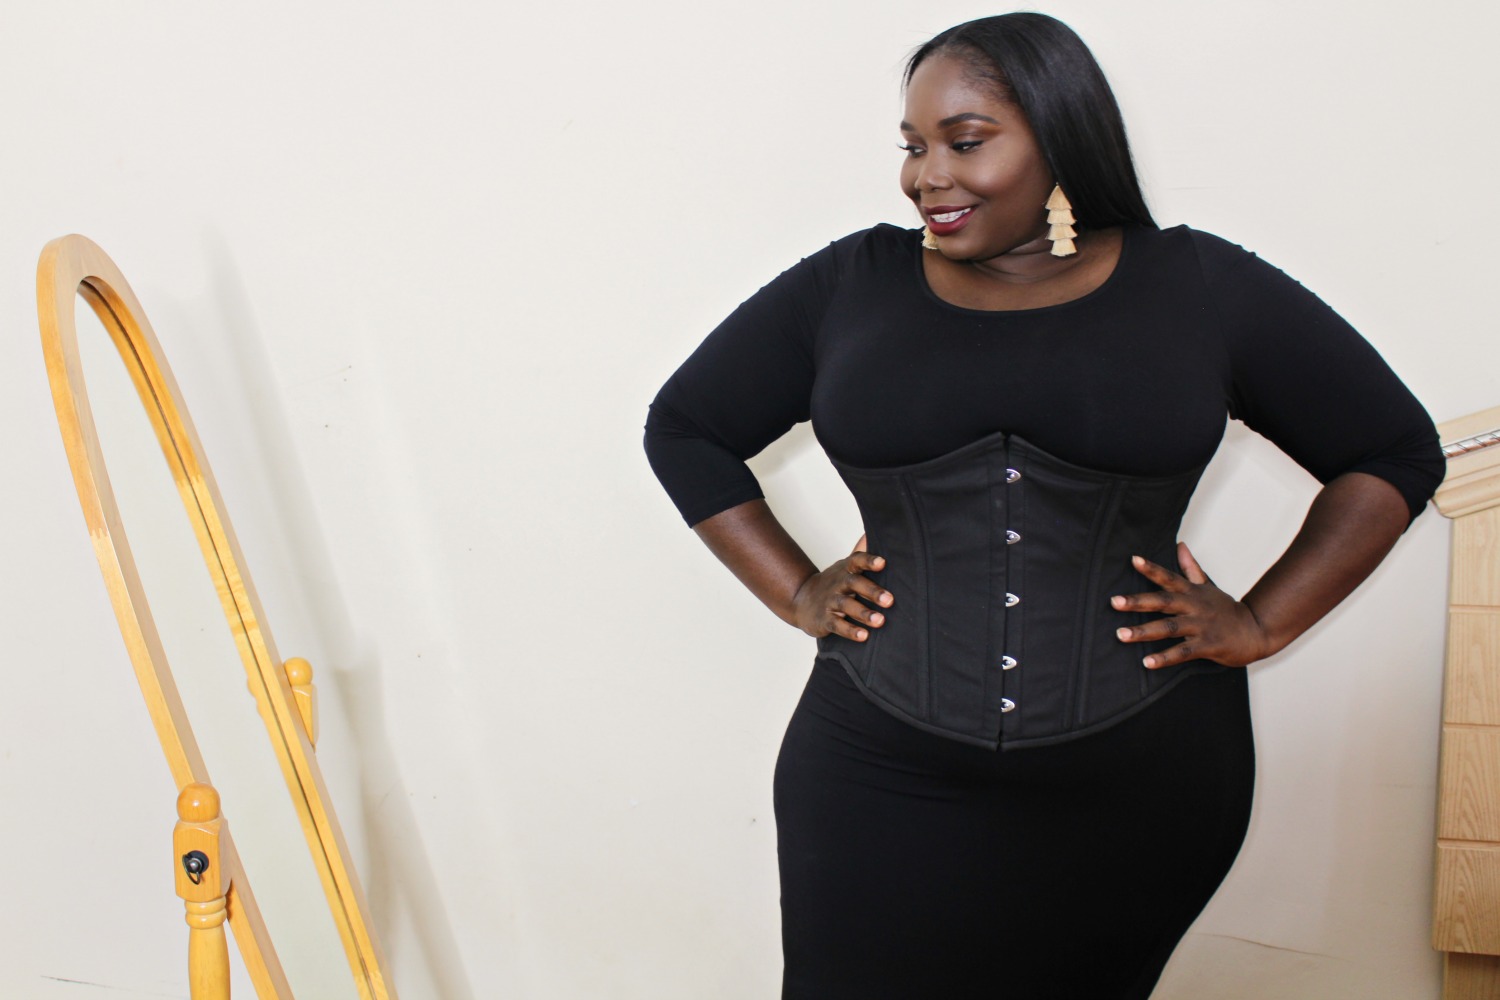 Find Beautiful Designs Of Our Very Own Plus Size Corset